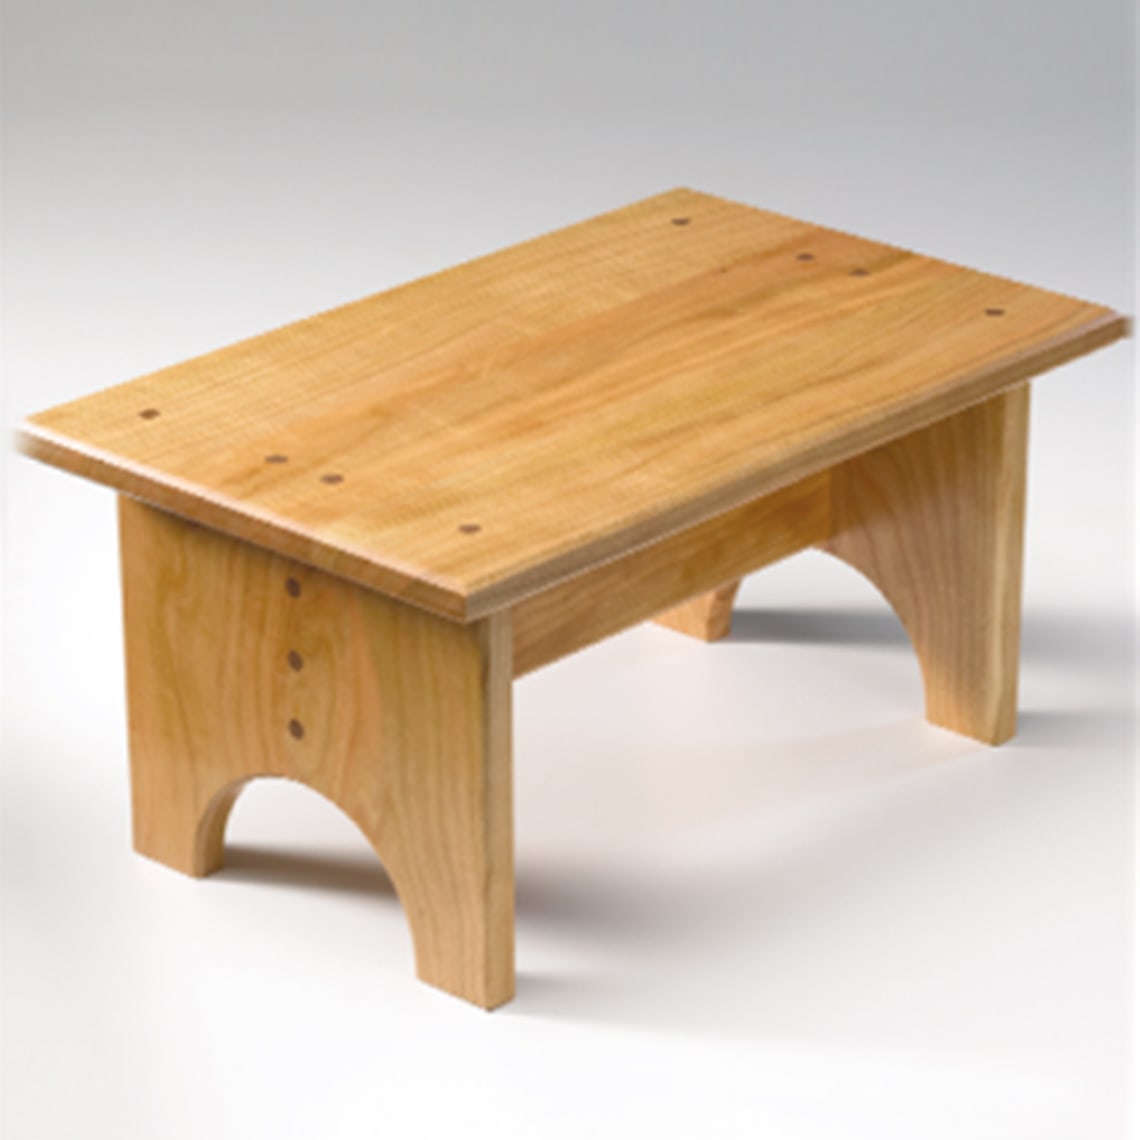 Miller Dowel Joinery System Stool